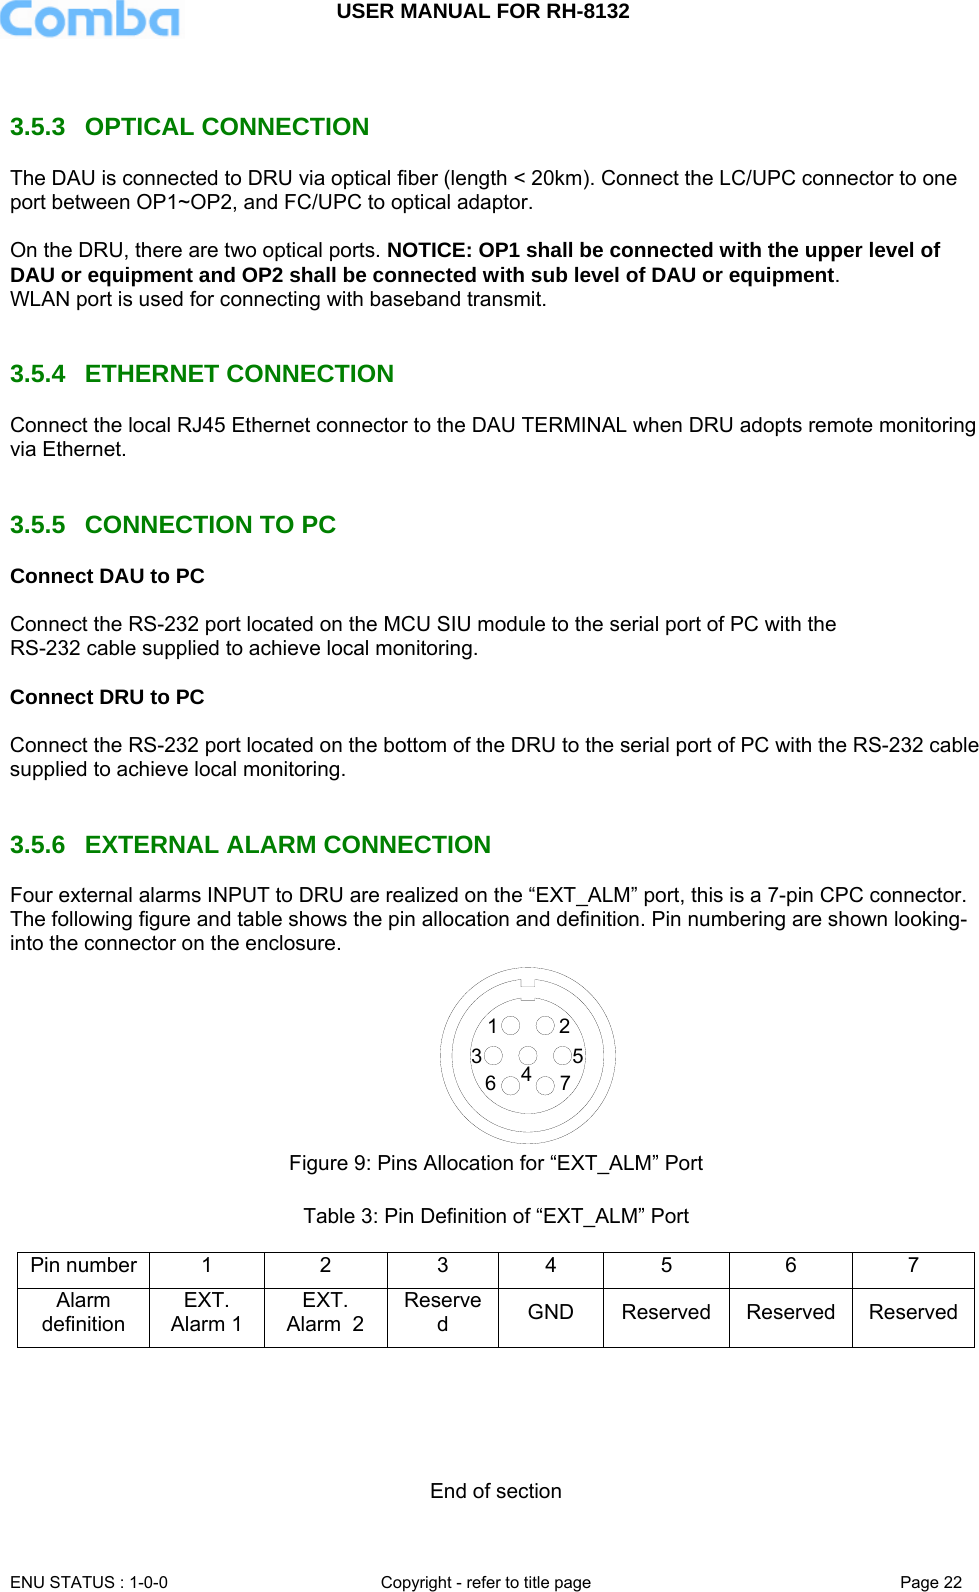 USER MANUAL FOR RH-8132     ENU STATUS : 1-0-0  Copyright - refer to title page  Page 22    3.5.3  OPTICAL CONNECTION  The DAU is connected to DRU via optical fiber (length &lt; 20km). Connect the LC/UPC connector to one port between OP1~OP2, and FC/UPC to optical adaptor.   On the DRU, there are two optical ports. NOTICE: OP1 shall be connected with the upper level of DAU or equipment and OP2 shall be connected with sub level of DAU or equipment.  WLAN port is used for connecting with baseband transmit.   3.5.4  ETHERNET CONNECTION  Connect the local RJ45 Ethernet connector to the DAU TERMINAL when DRU adopts remote monitoring via Ethernet.    3.5.5  CONNECTION TO PC Connect DAU to PC  Connect the RS-232 port located on the MCU SIU module to the serial port of PC with the  RS-232 cable supplied to achieve local monitoring.   Connect DRU to PC  Connect the RS-232 port located on the bottom of the DRU to the serial port of PC with the RS-232 cable supplied to achieve local monitoring.    3.5.6  EXTERNAL ALARM CONNECTION Four external alarms INPUT to DRU are realized on the “EXT_ALM” port, this is a 7-pin CPC connector. The following figure and table shows the pin allocation and definition. Pin numbering are shown looking-into the connector on the enclosure.  7635412 Figure 9: Pins Allocation for “EXT_ALM” Port  Table 3: Pin Definition of “EXT_ALM” Port  Pin number  1  2  3  4  5  6  7 Alarm definition EXT. Alarm 1 EXT. Alarm  2 Reserved  GND Reserved Reserved Reserved     End of section 